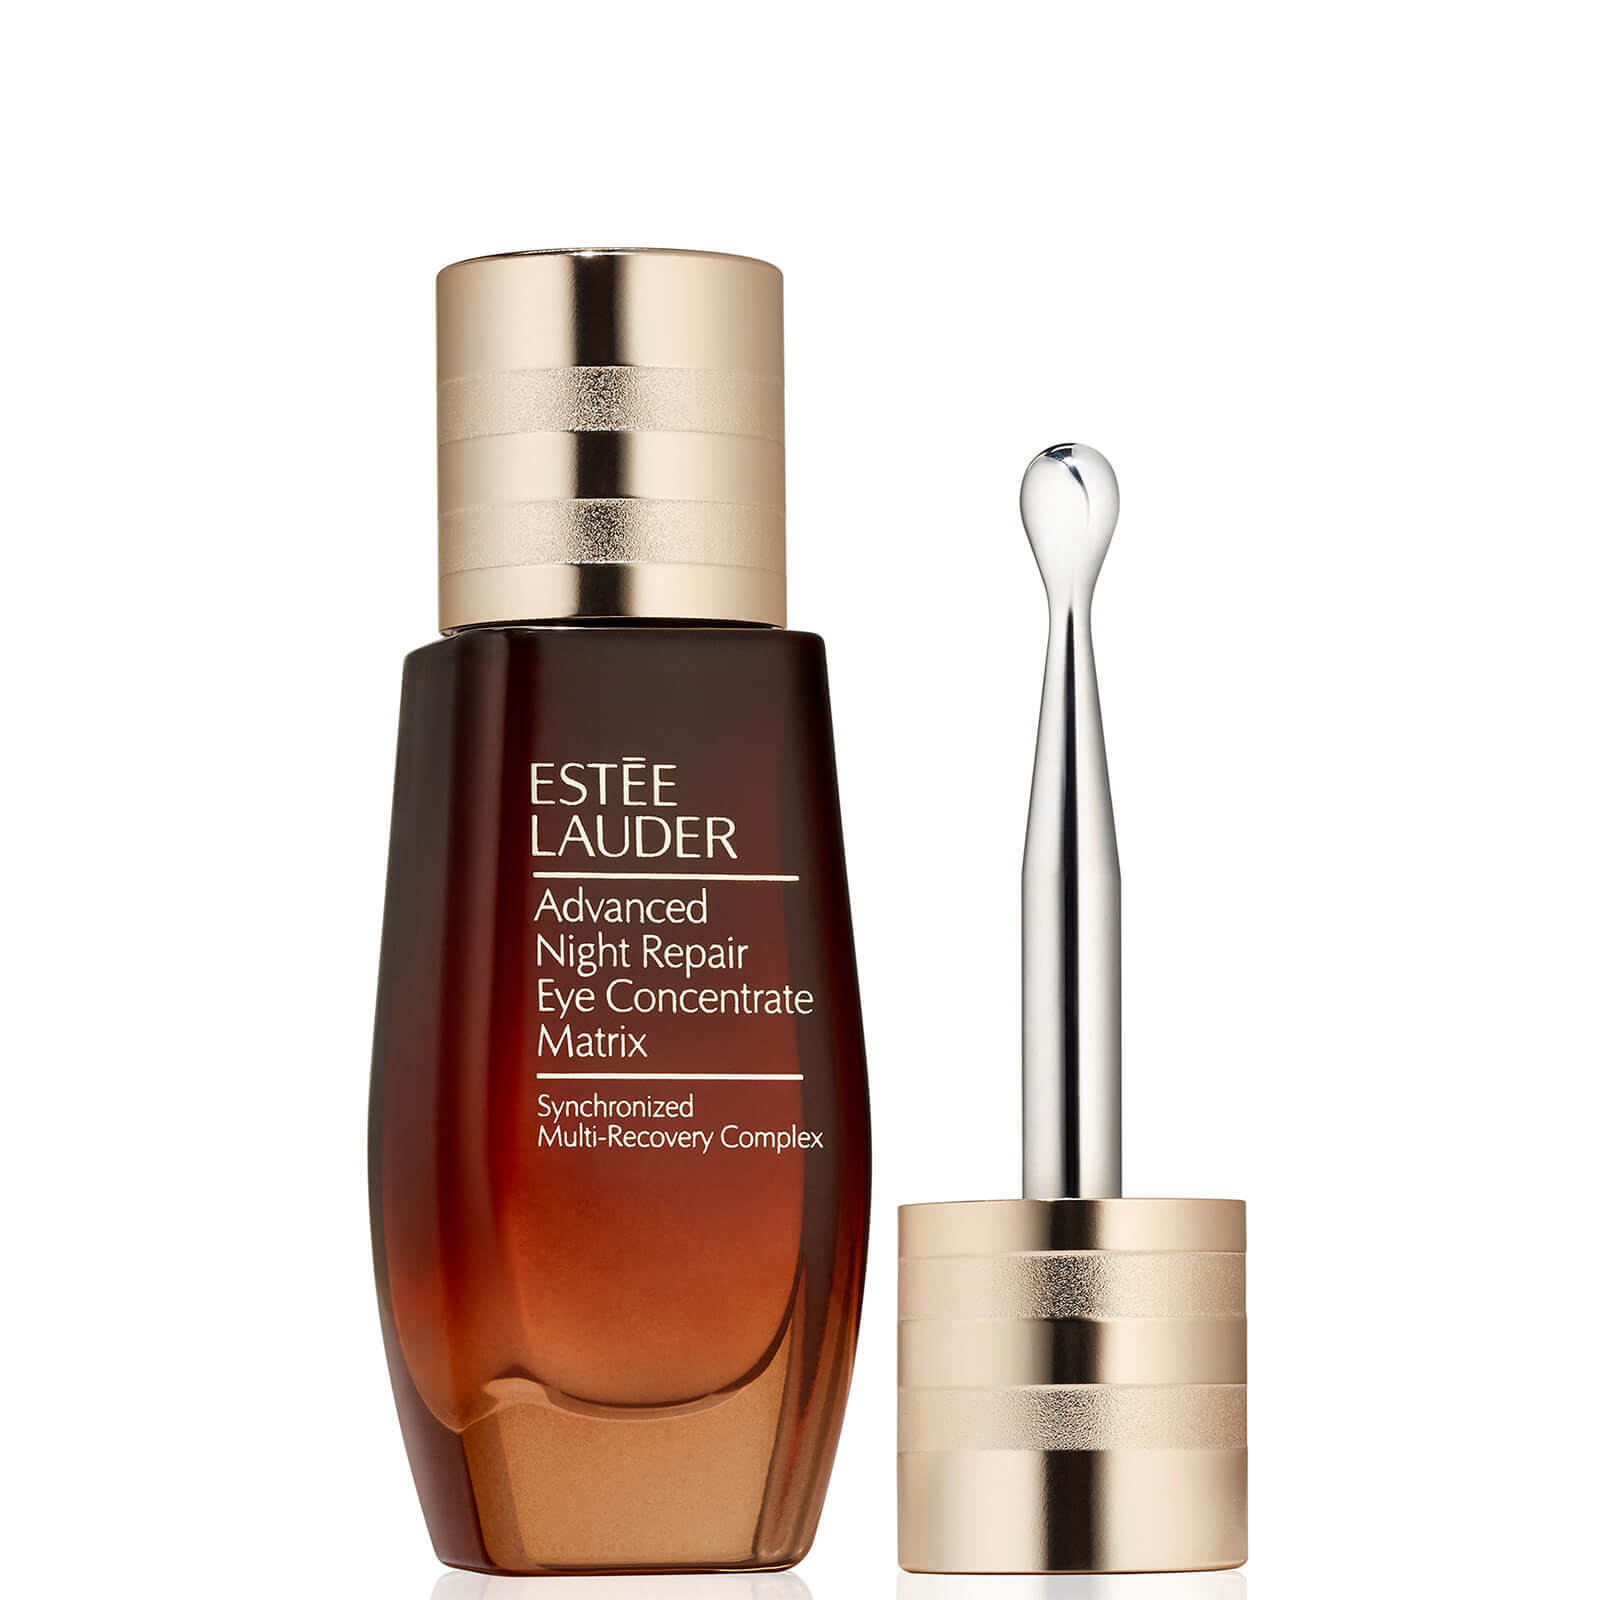 Estee Lauder Advanced Night Repair Eye Concentrate Matrix Synchronized Recovery Complex 15ml